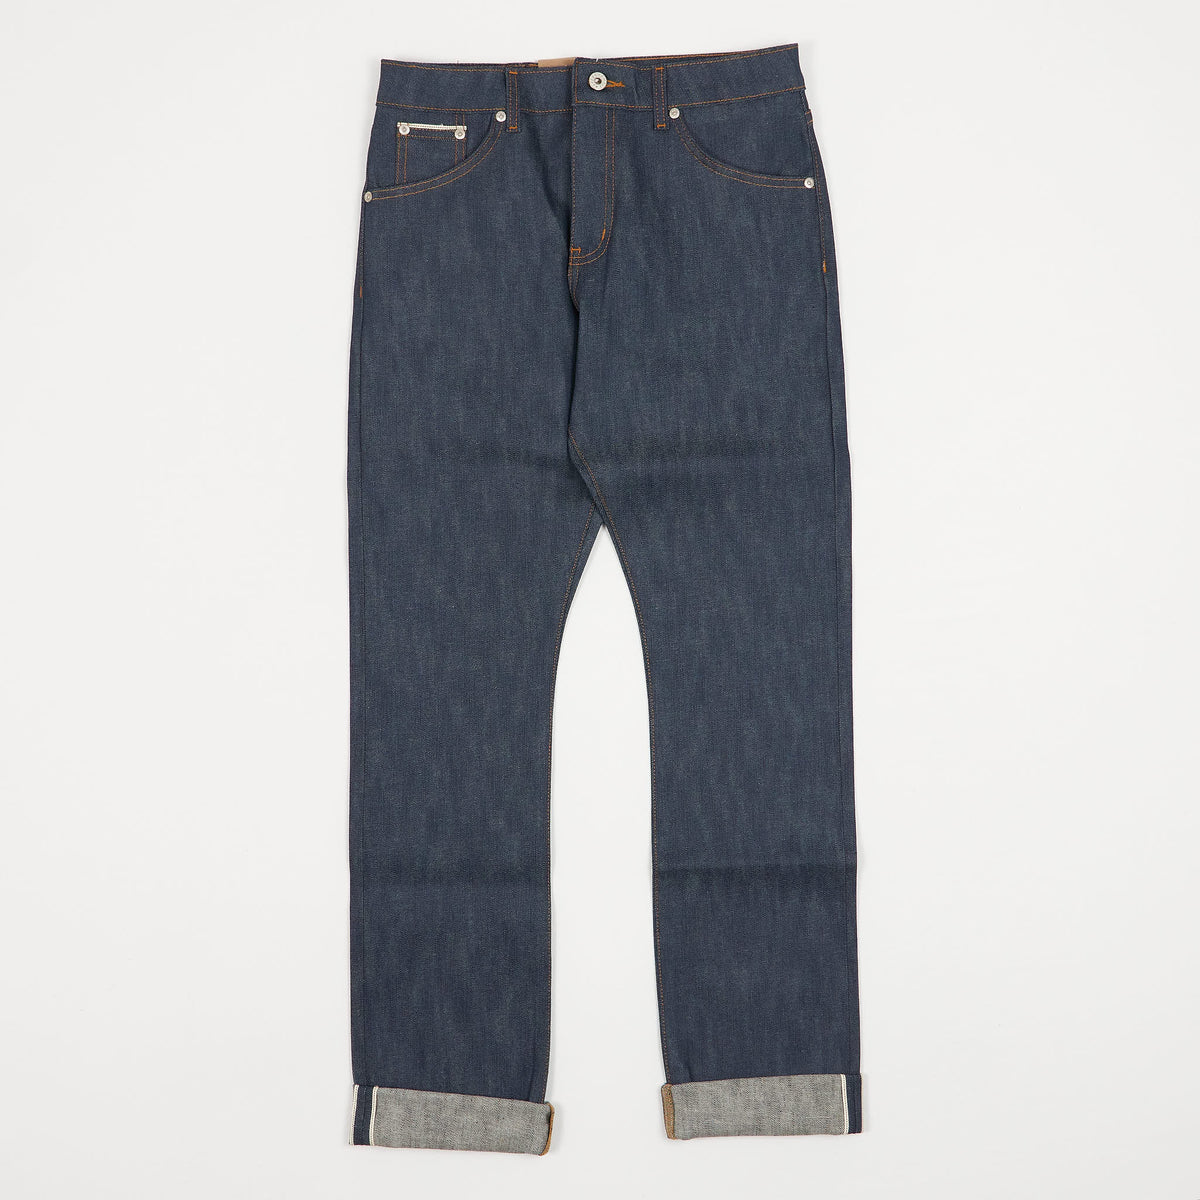 Naked &amp; Famous Ladies Golden Hour Japanese Selvage Denim Stretch Jeans